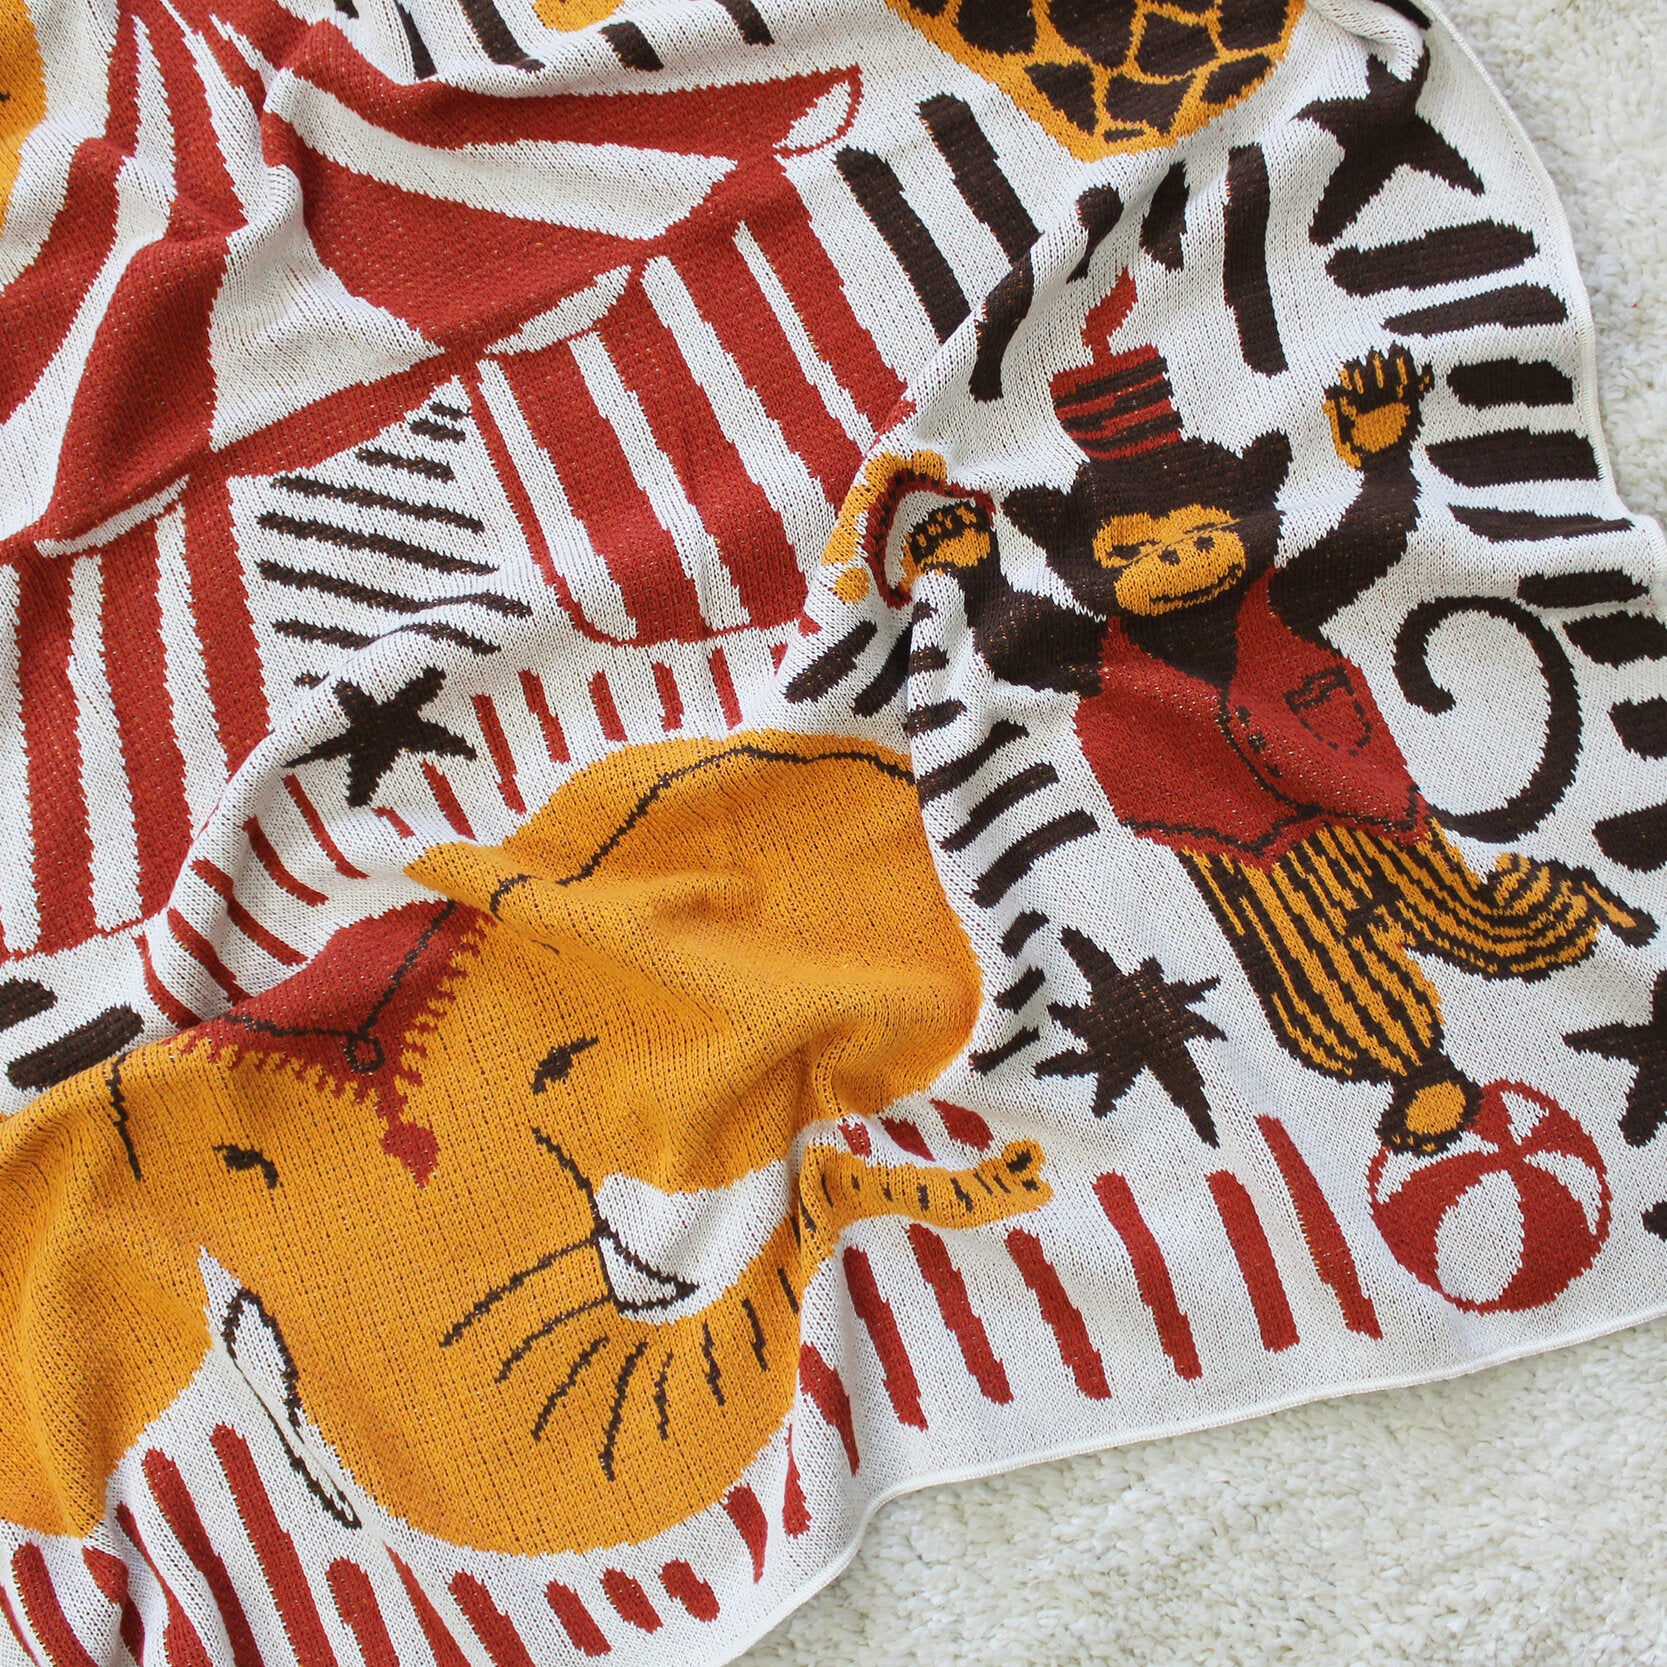 LIFE'S A CIRCUS KNIT BLANKET